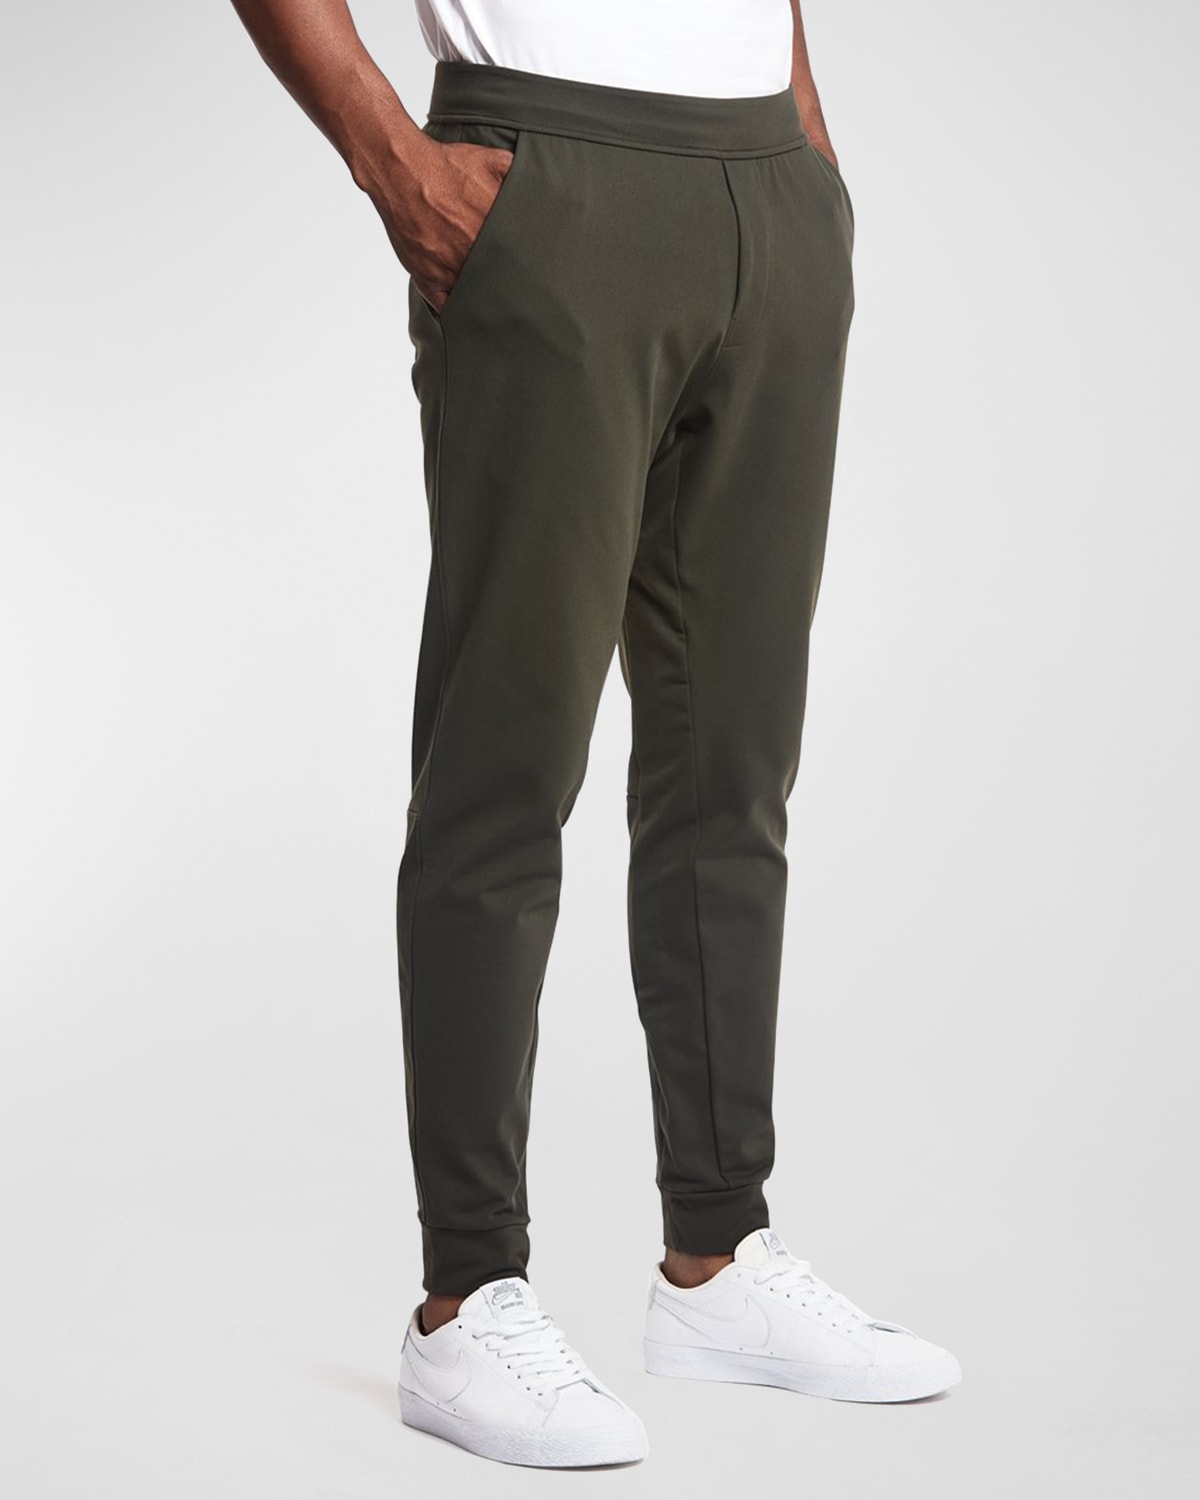 Public Rec: All Day Every Day Pant